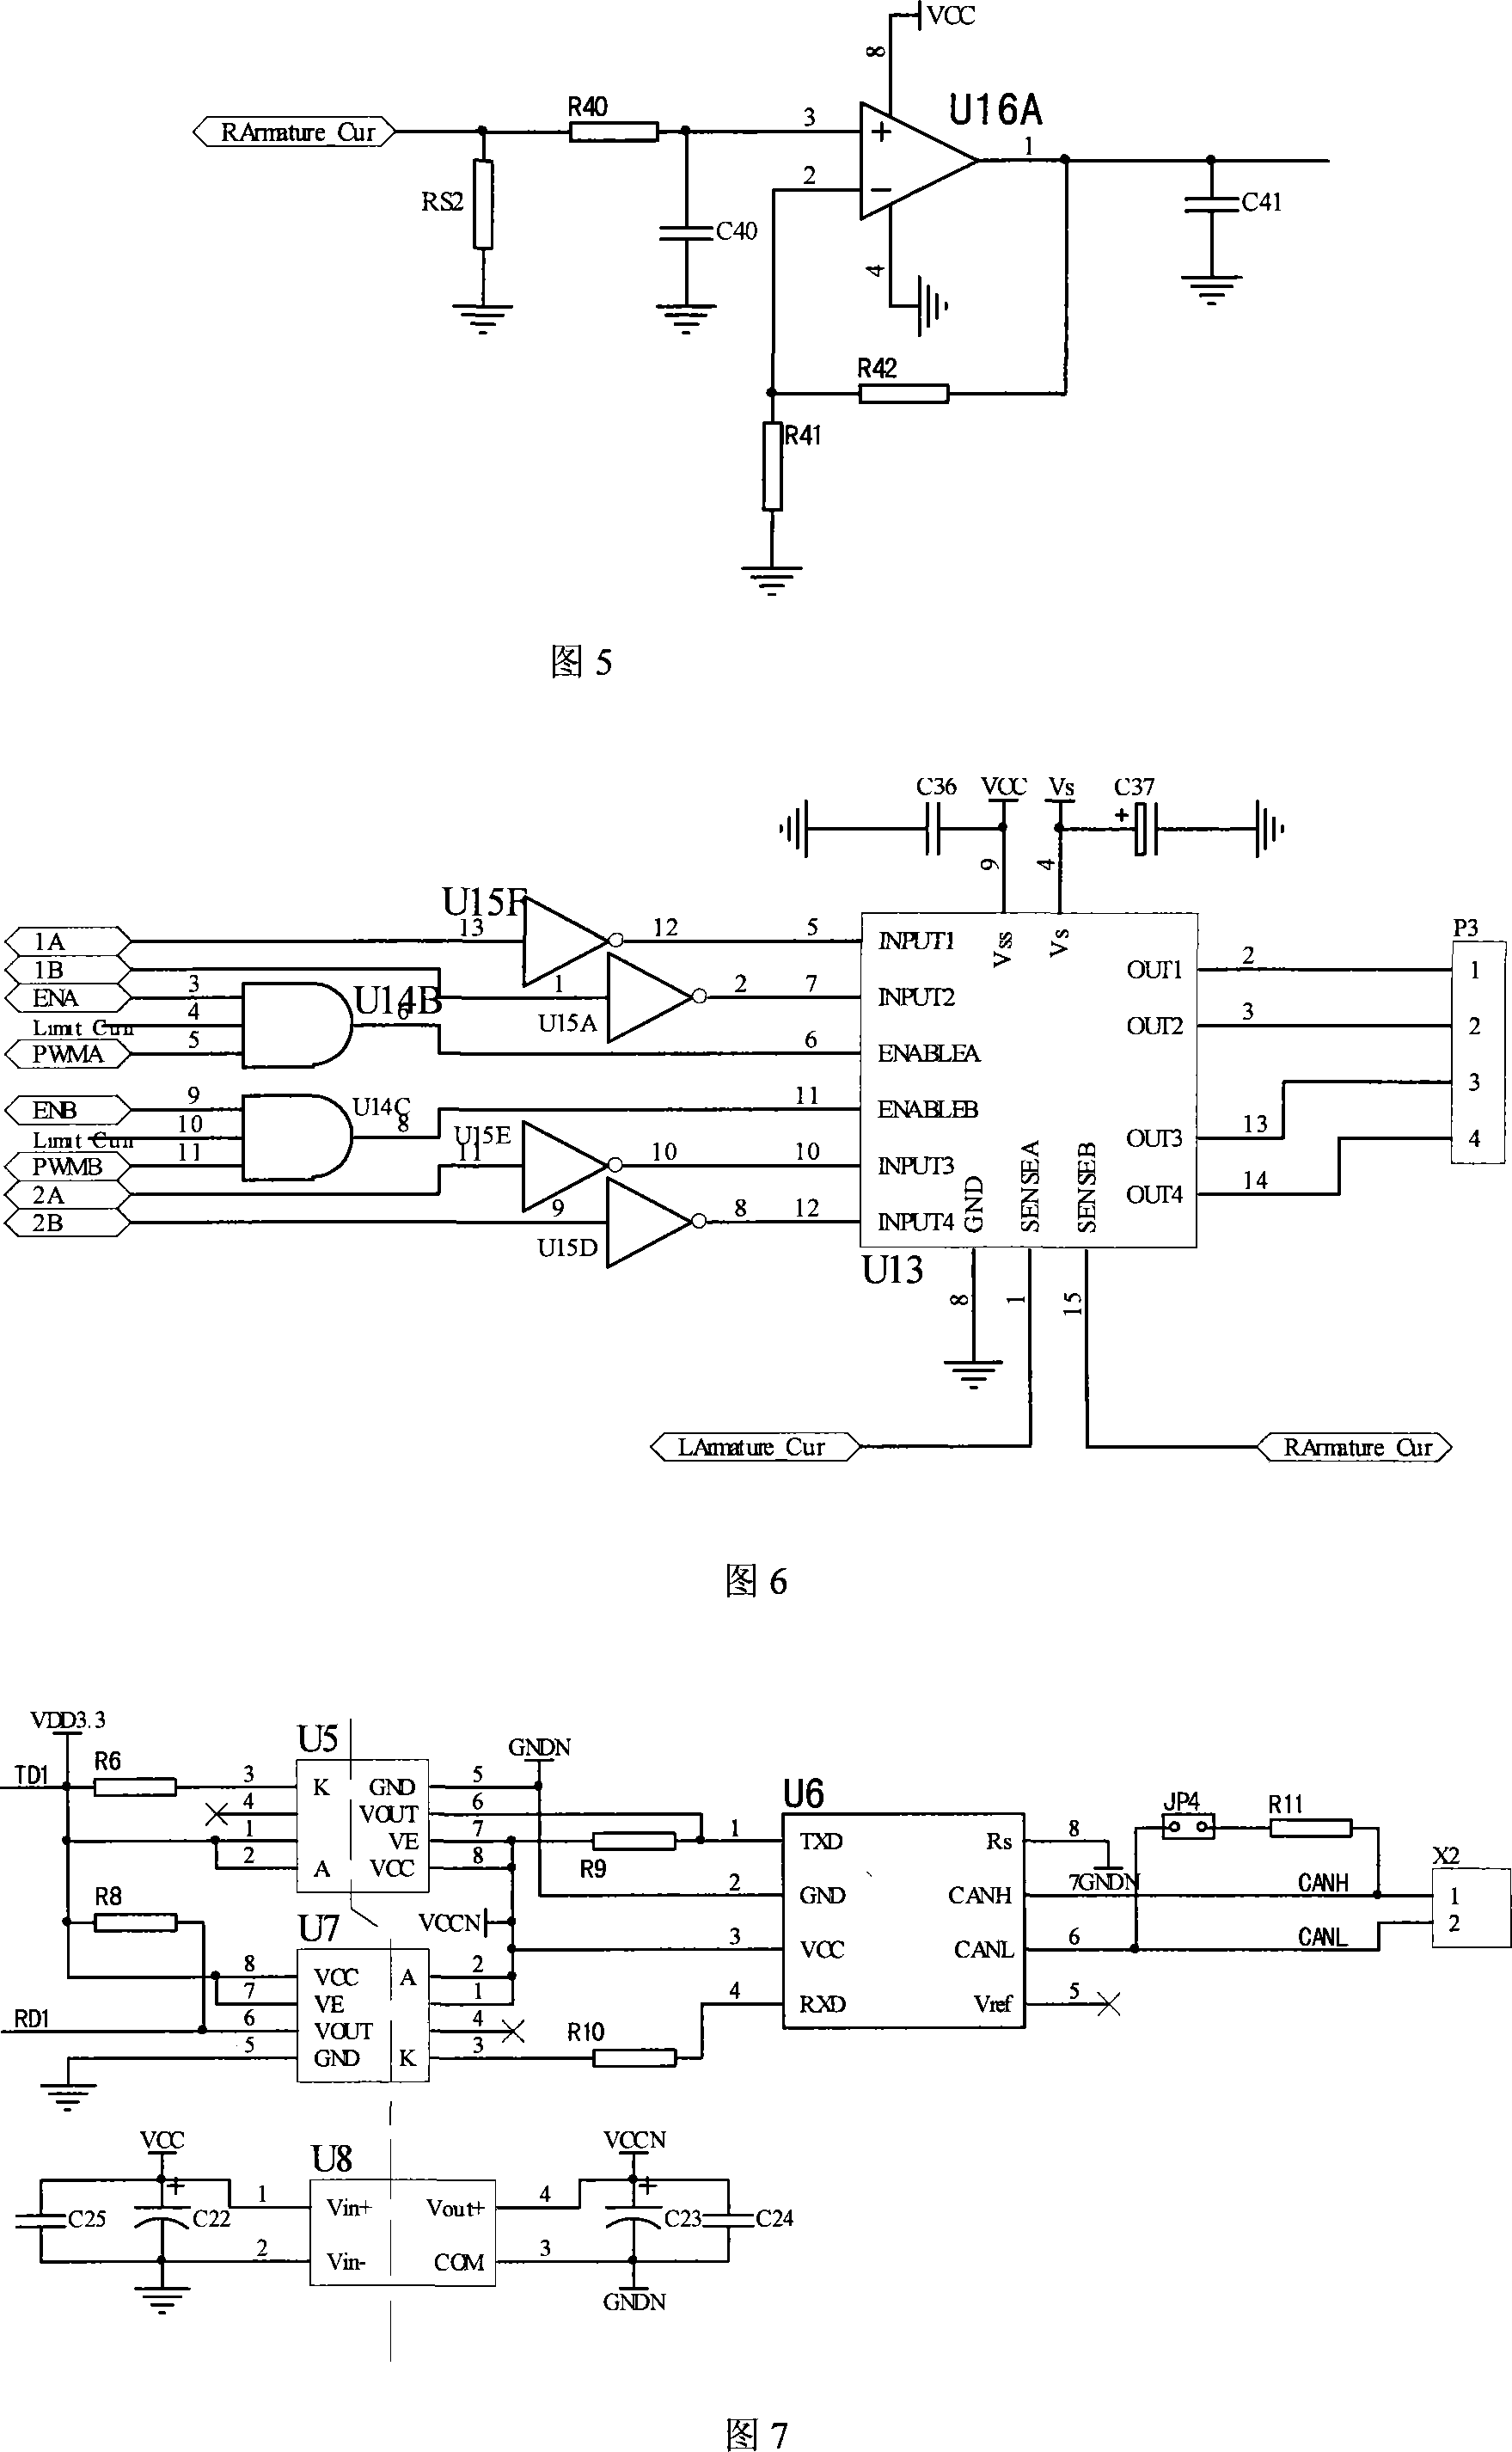 Stepper motor drive device based on CAN bus